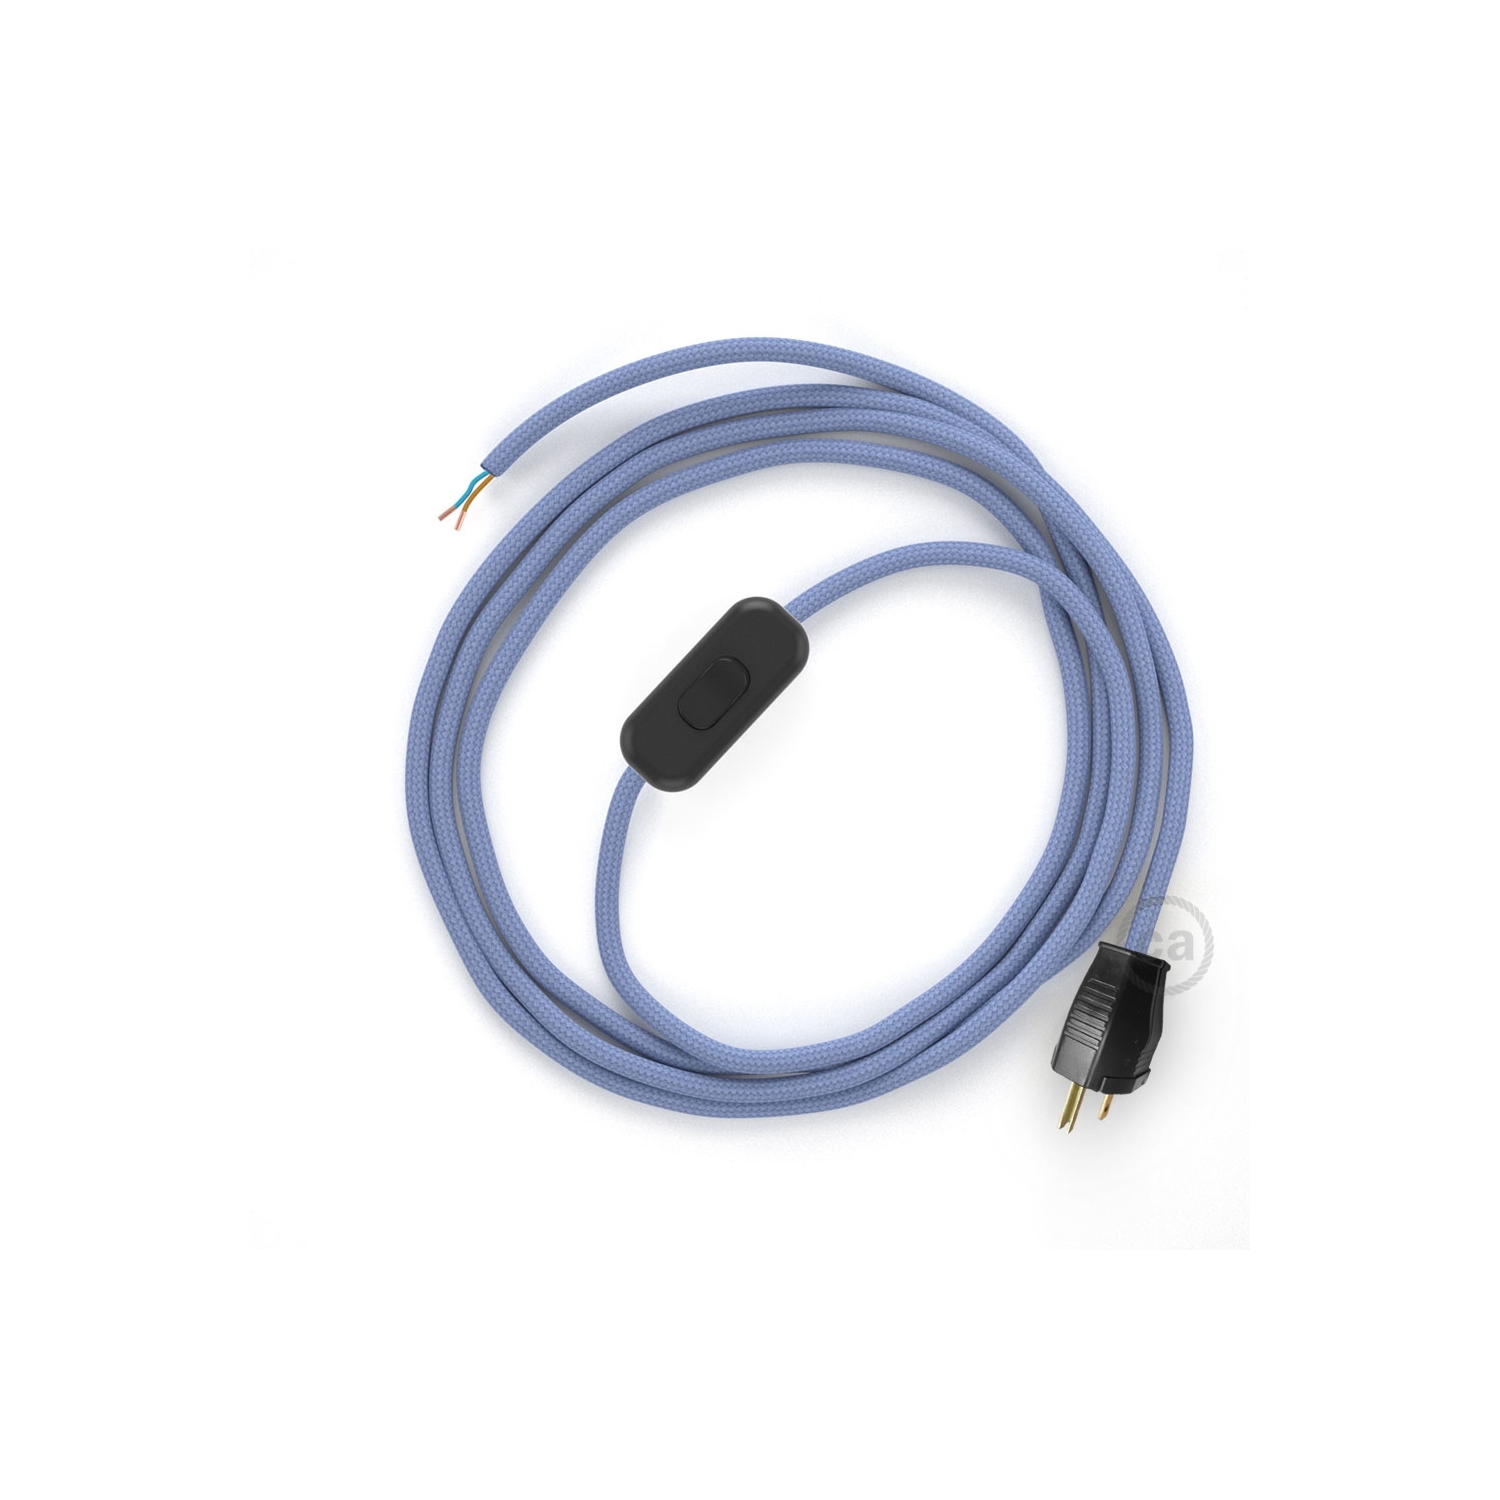 Power Cord with in-line switch, RM07 Lilac Rayon - Choose color of switch/plug